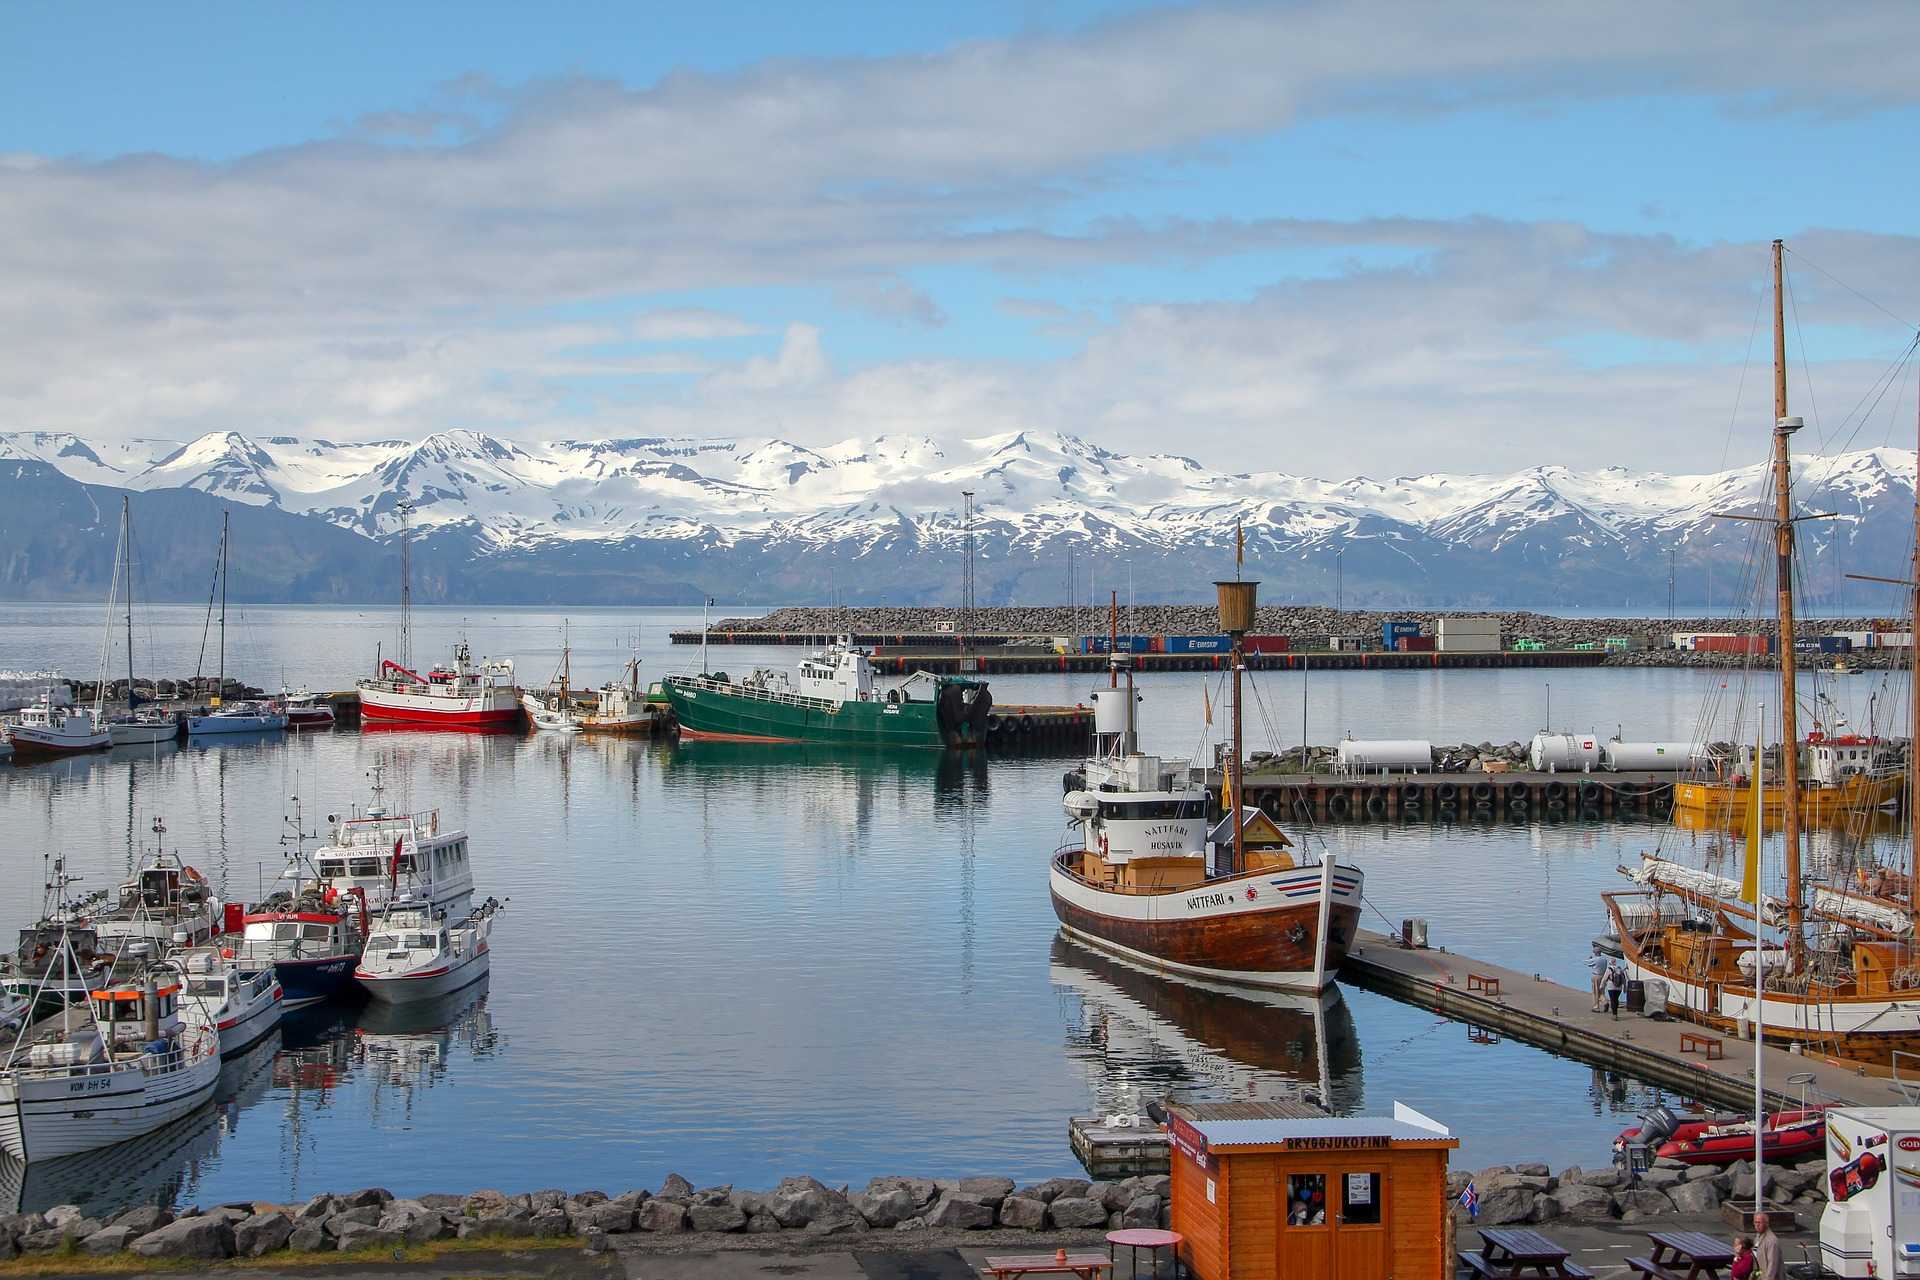 Iceland is an expensive country to travel in